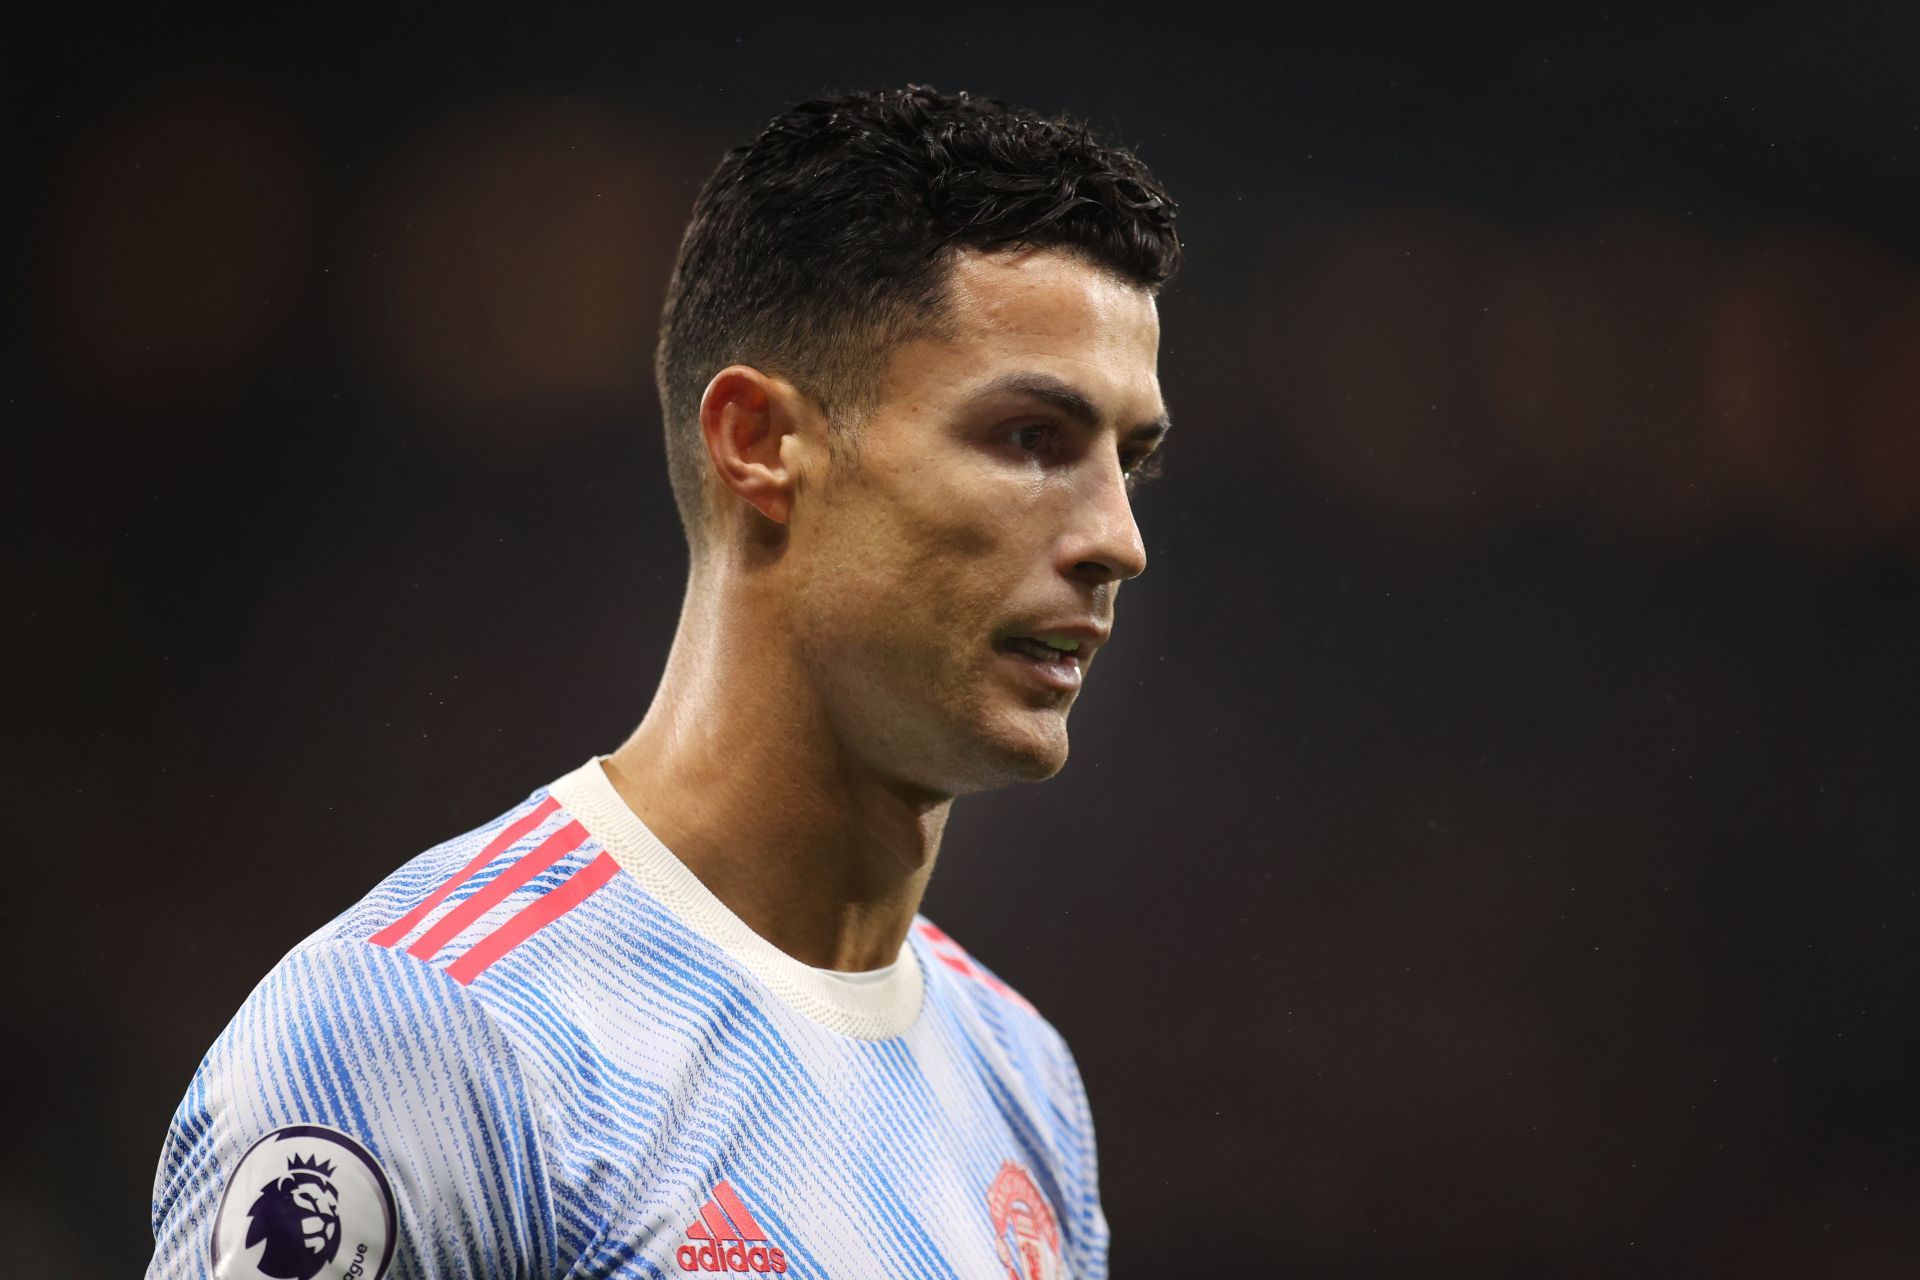 Watford takes a Twitter jibe at Cristiano Ronaldo after their 4-1 victory.